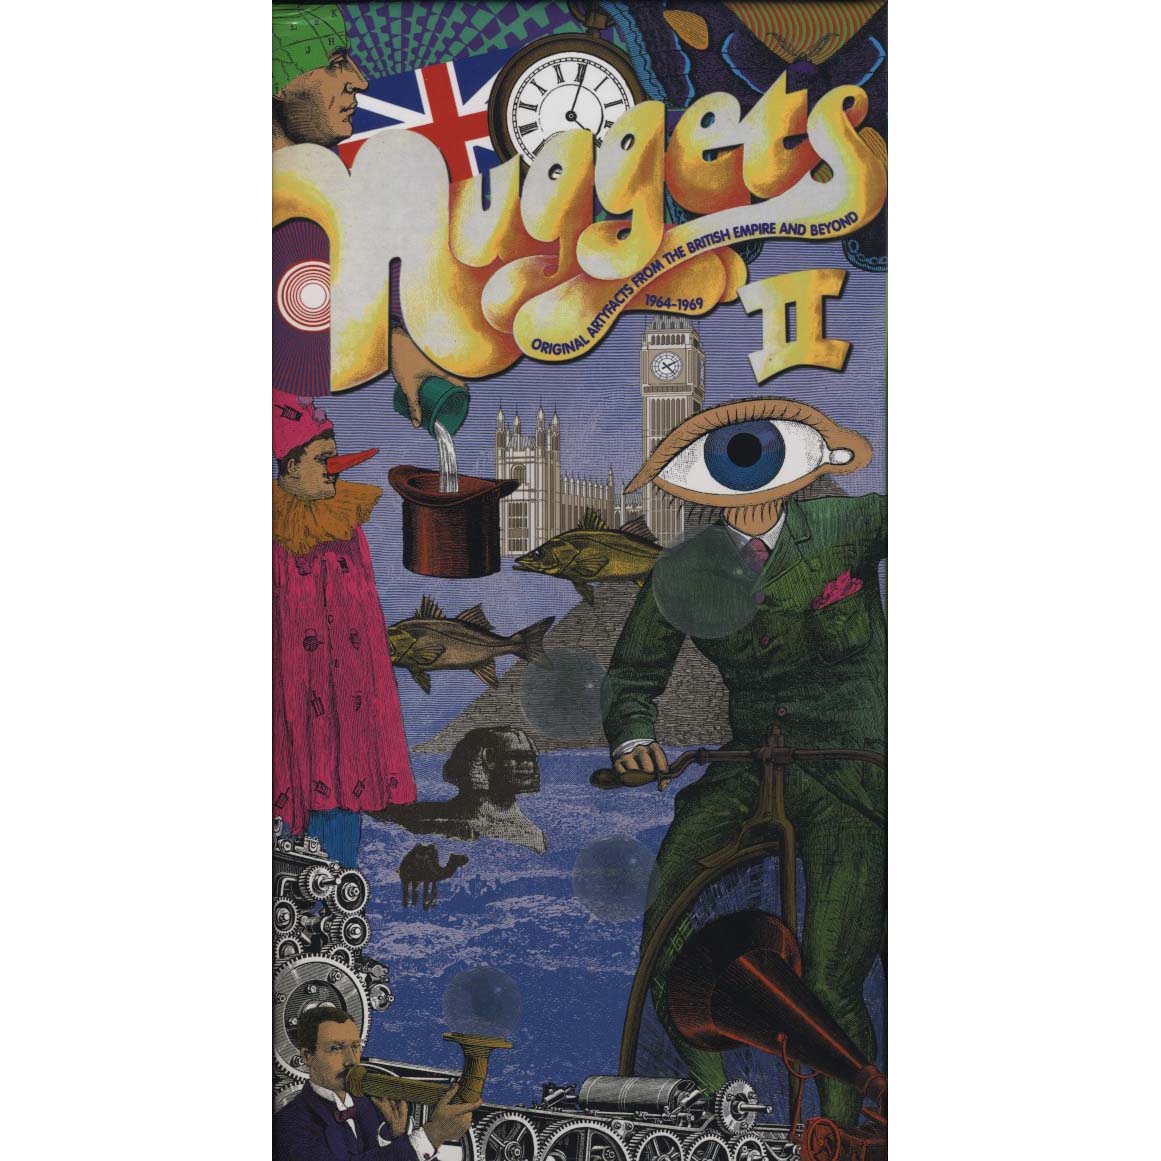 Various - Nuggets II (Original Artyfacts From The British Empire And Beyond 1964-1969)